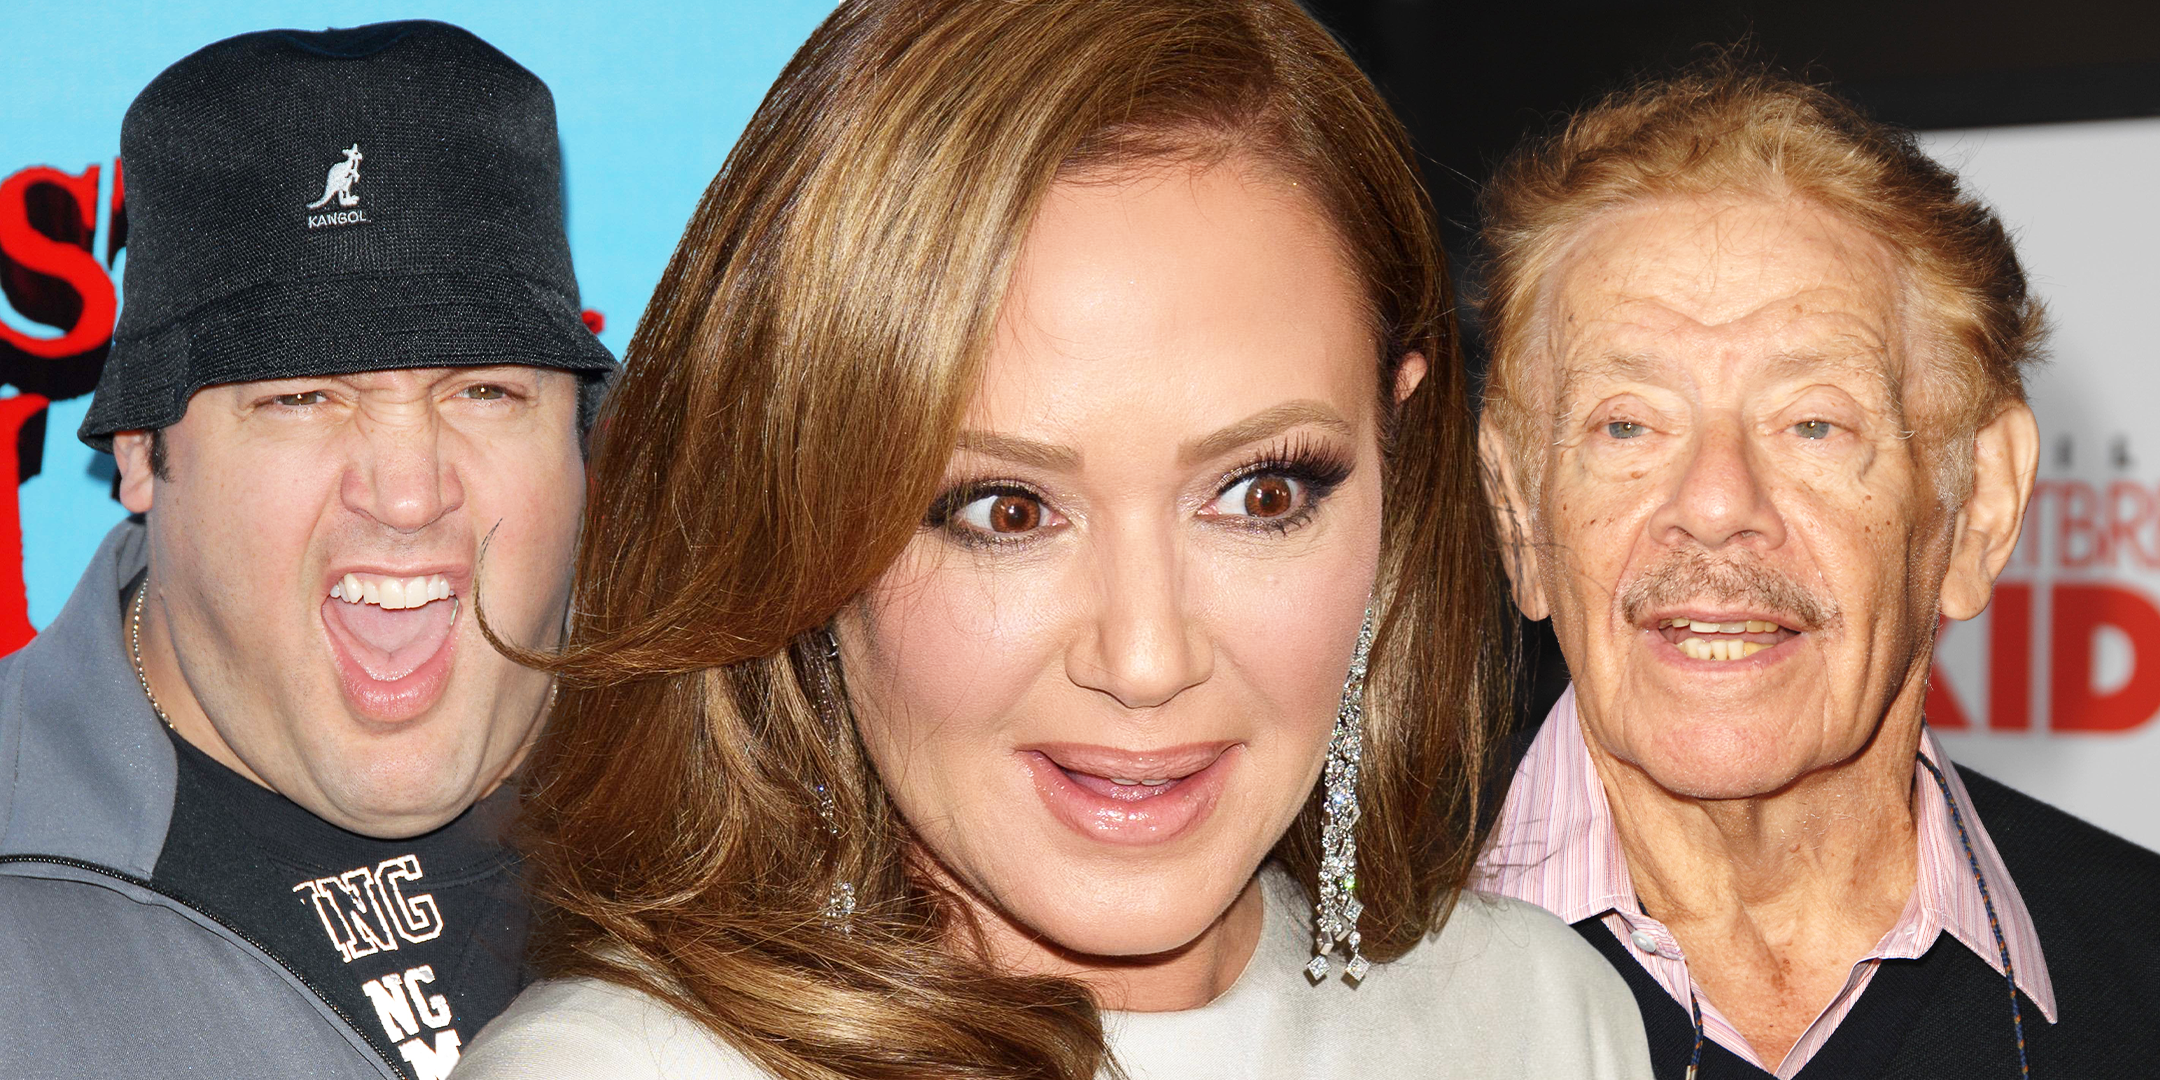 Kevin James, Leah Remini, and Jerry Stiller